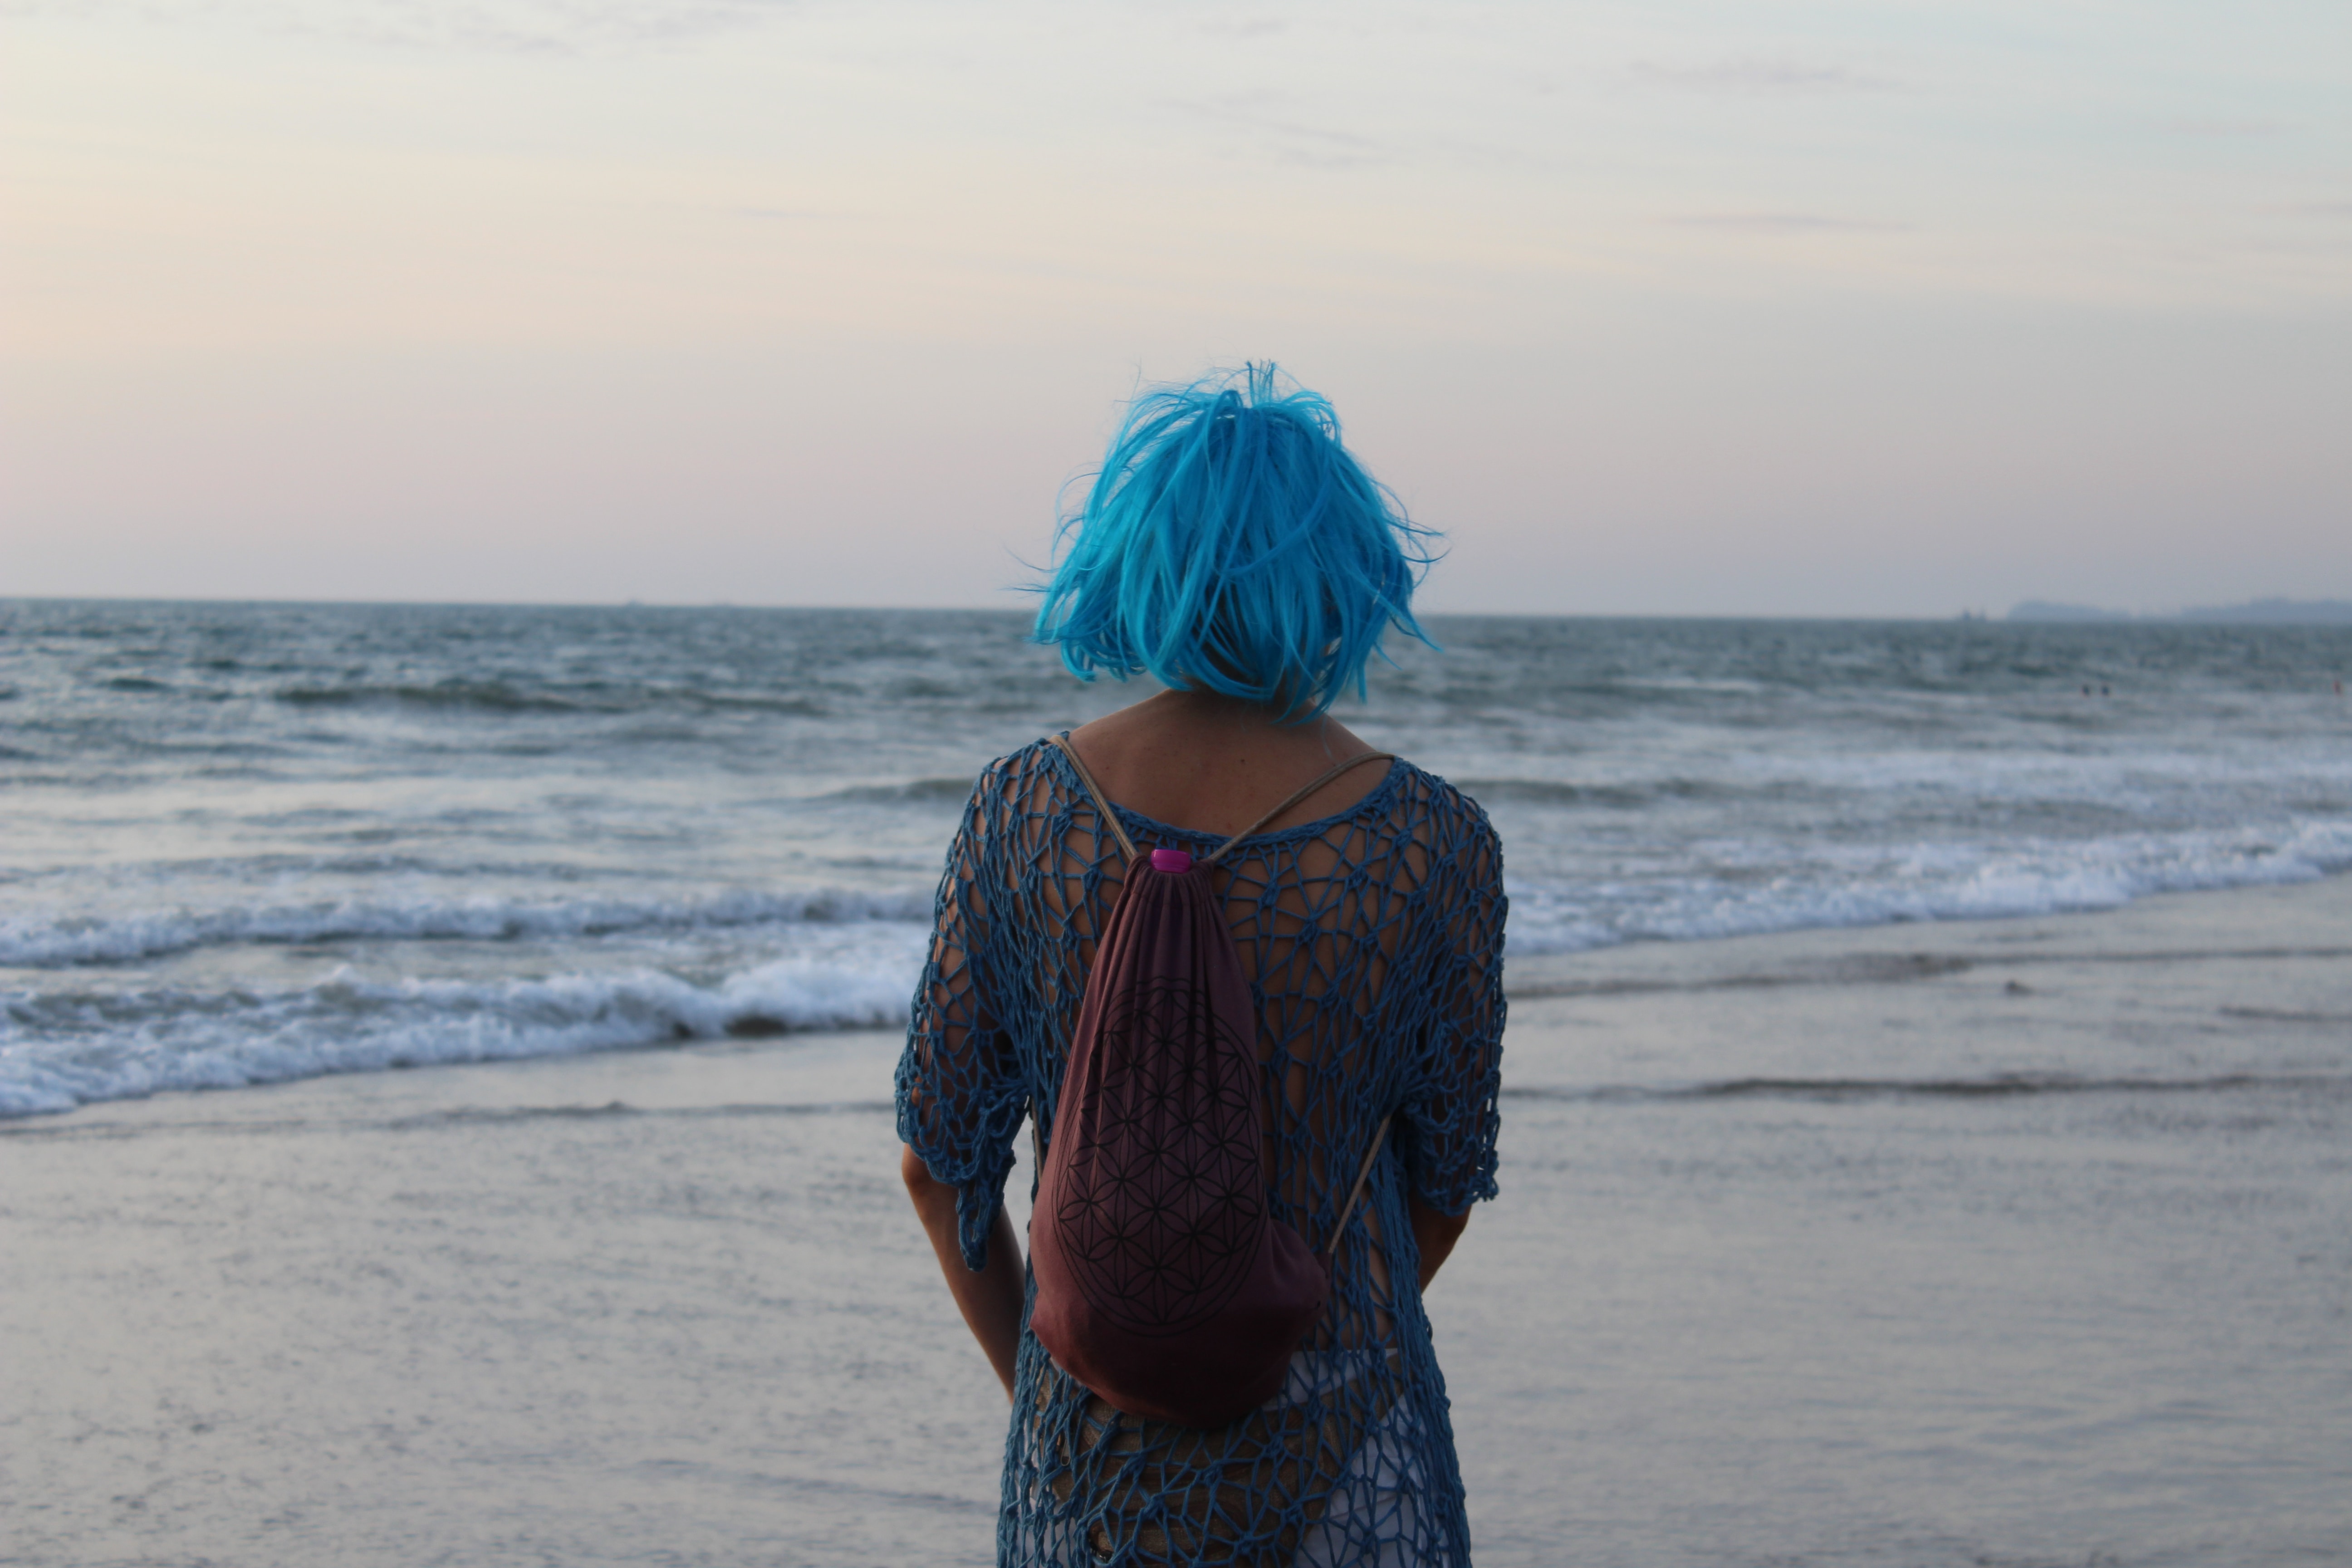 A woman standing on the beach. | Source: Unsplash